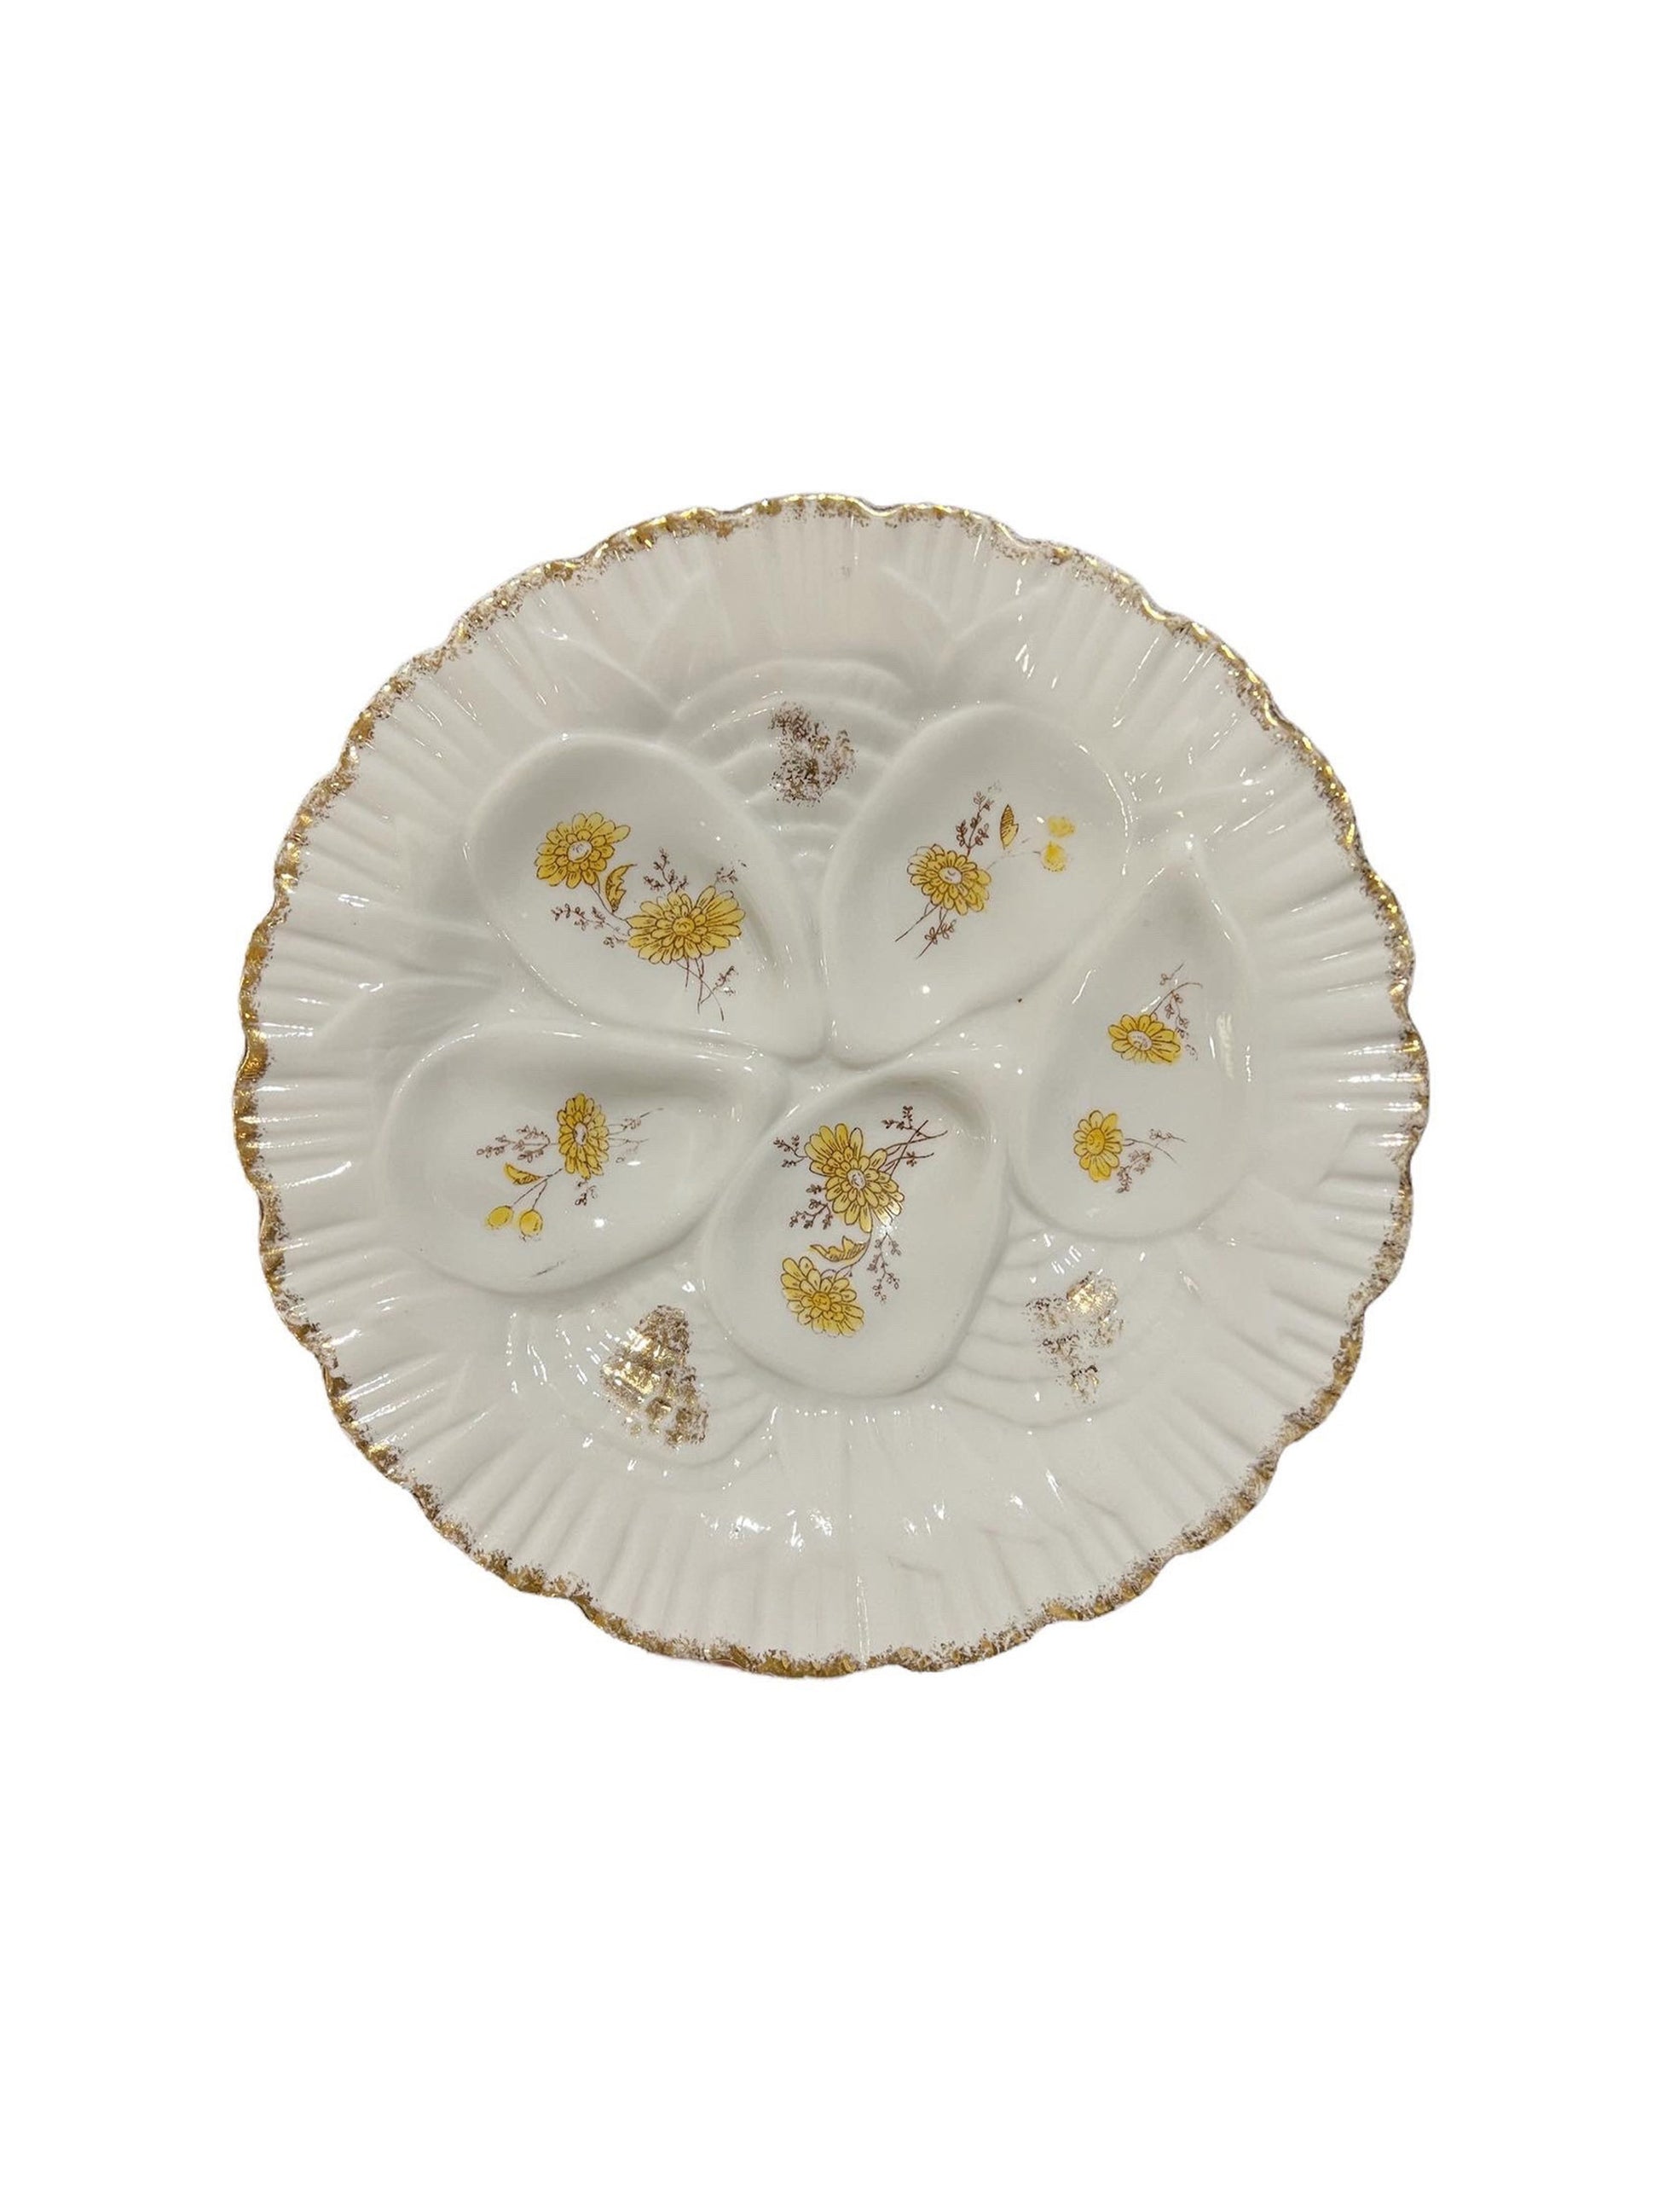 Vintage 19th Century Bavarian Yellow Flower Oyster Plate Weston Table